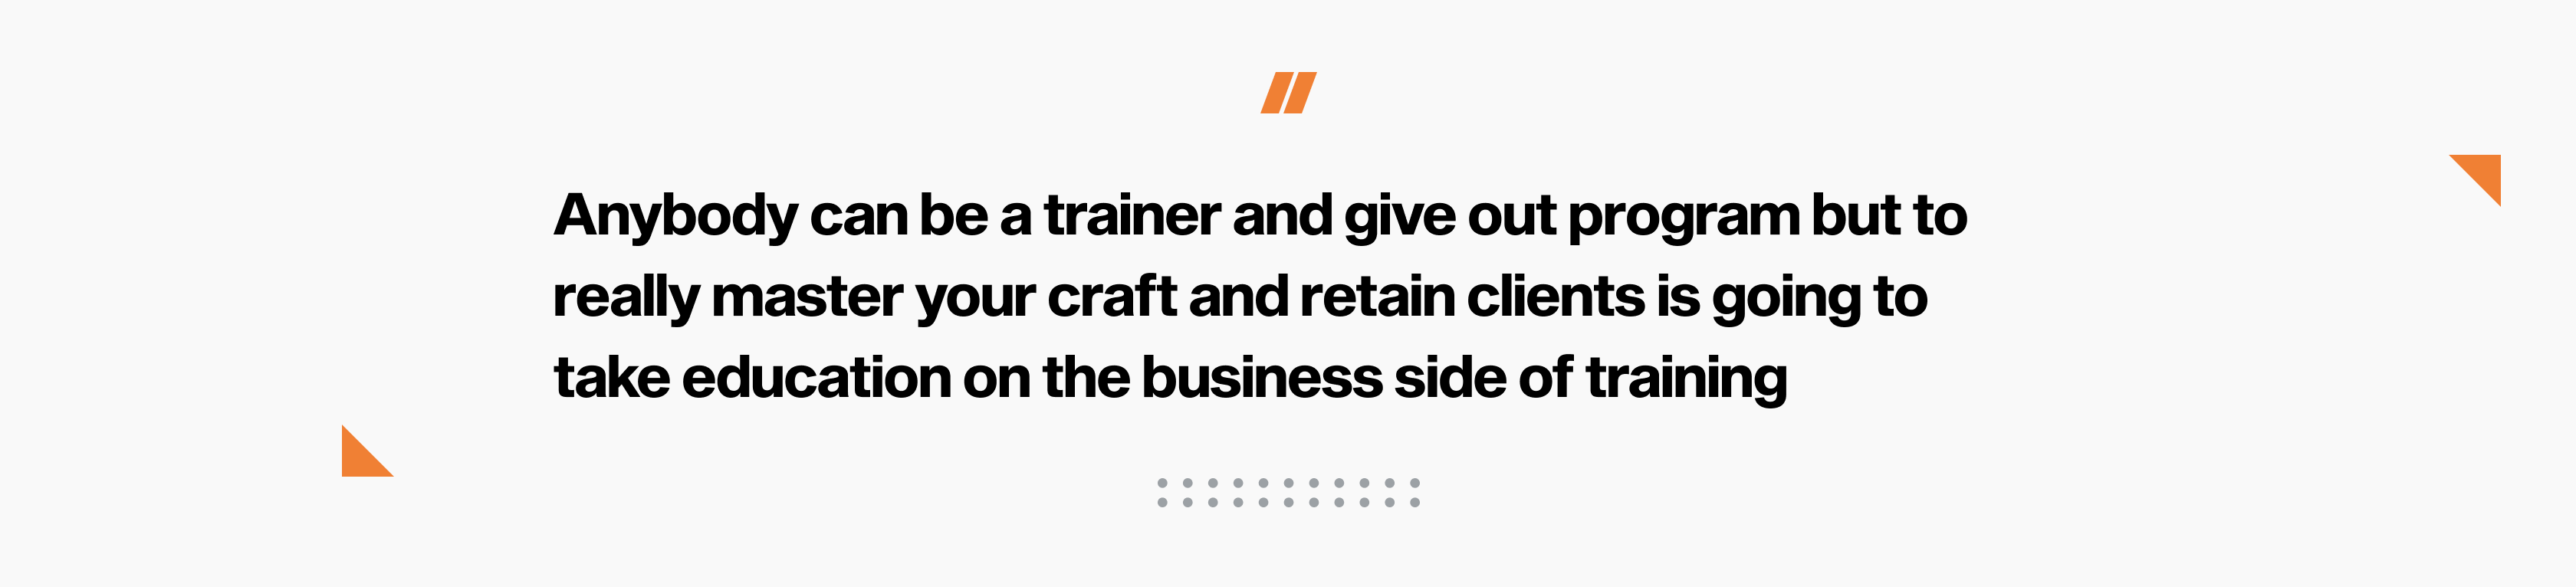 Anybody can be a trainer and give out program but to really master your craft and retain clients is going to take education on the business side of training